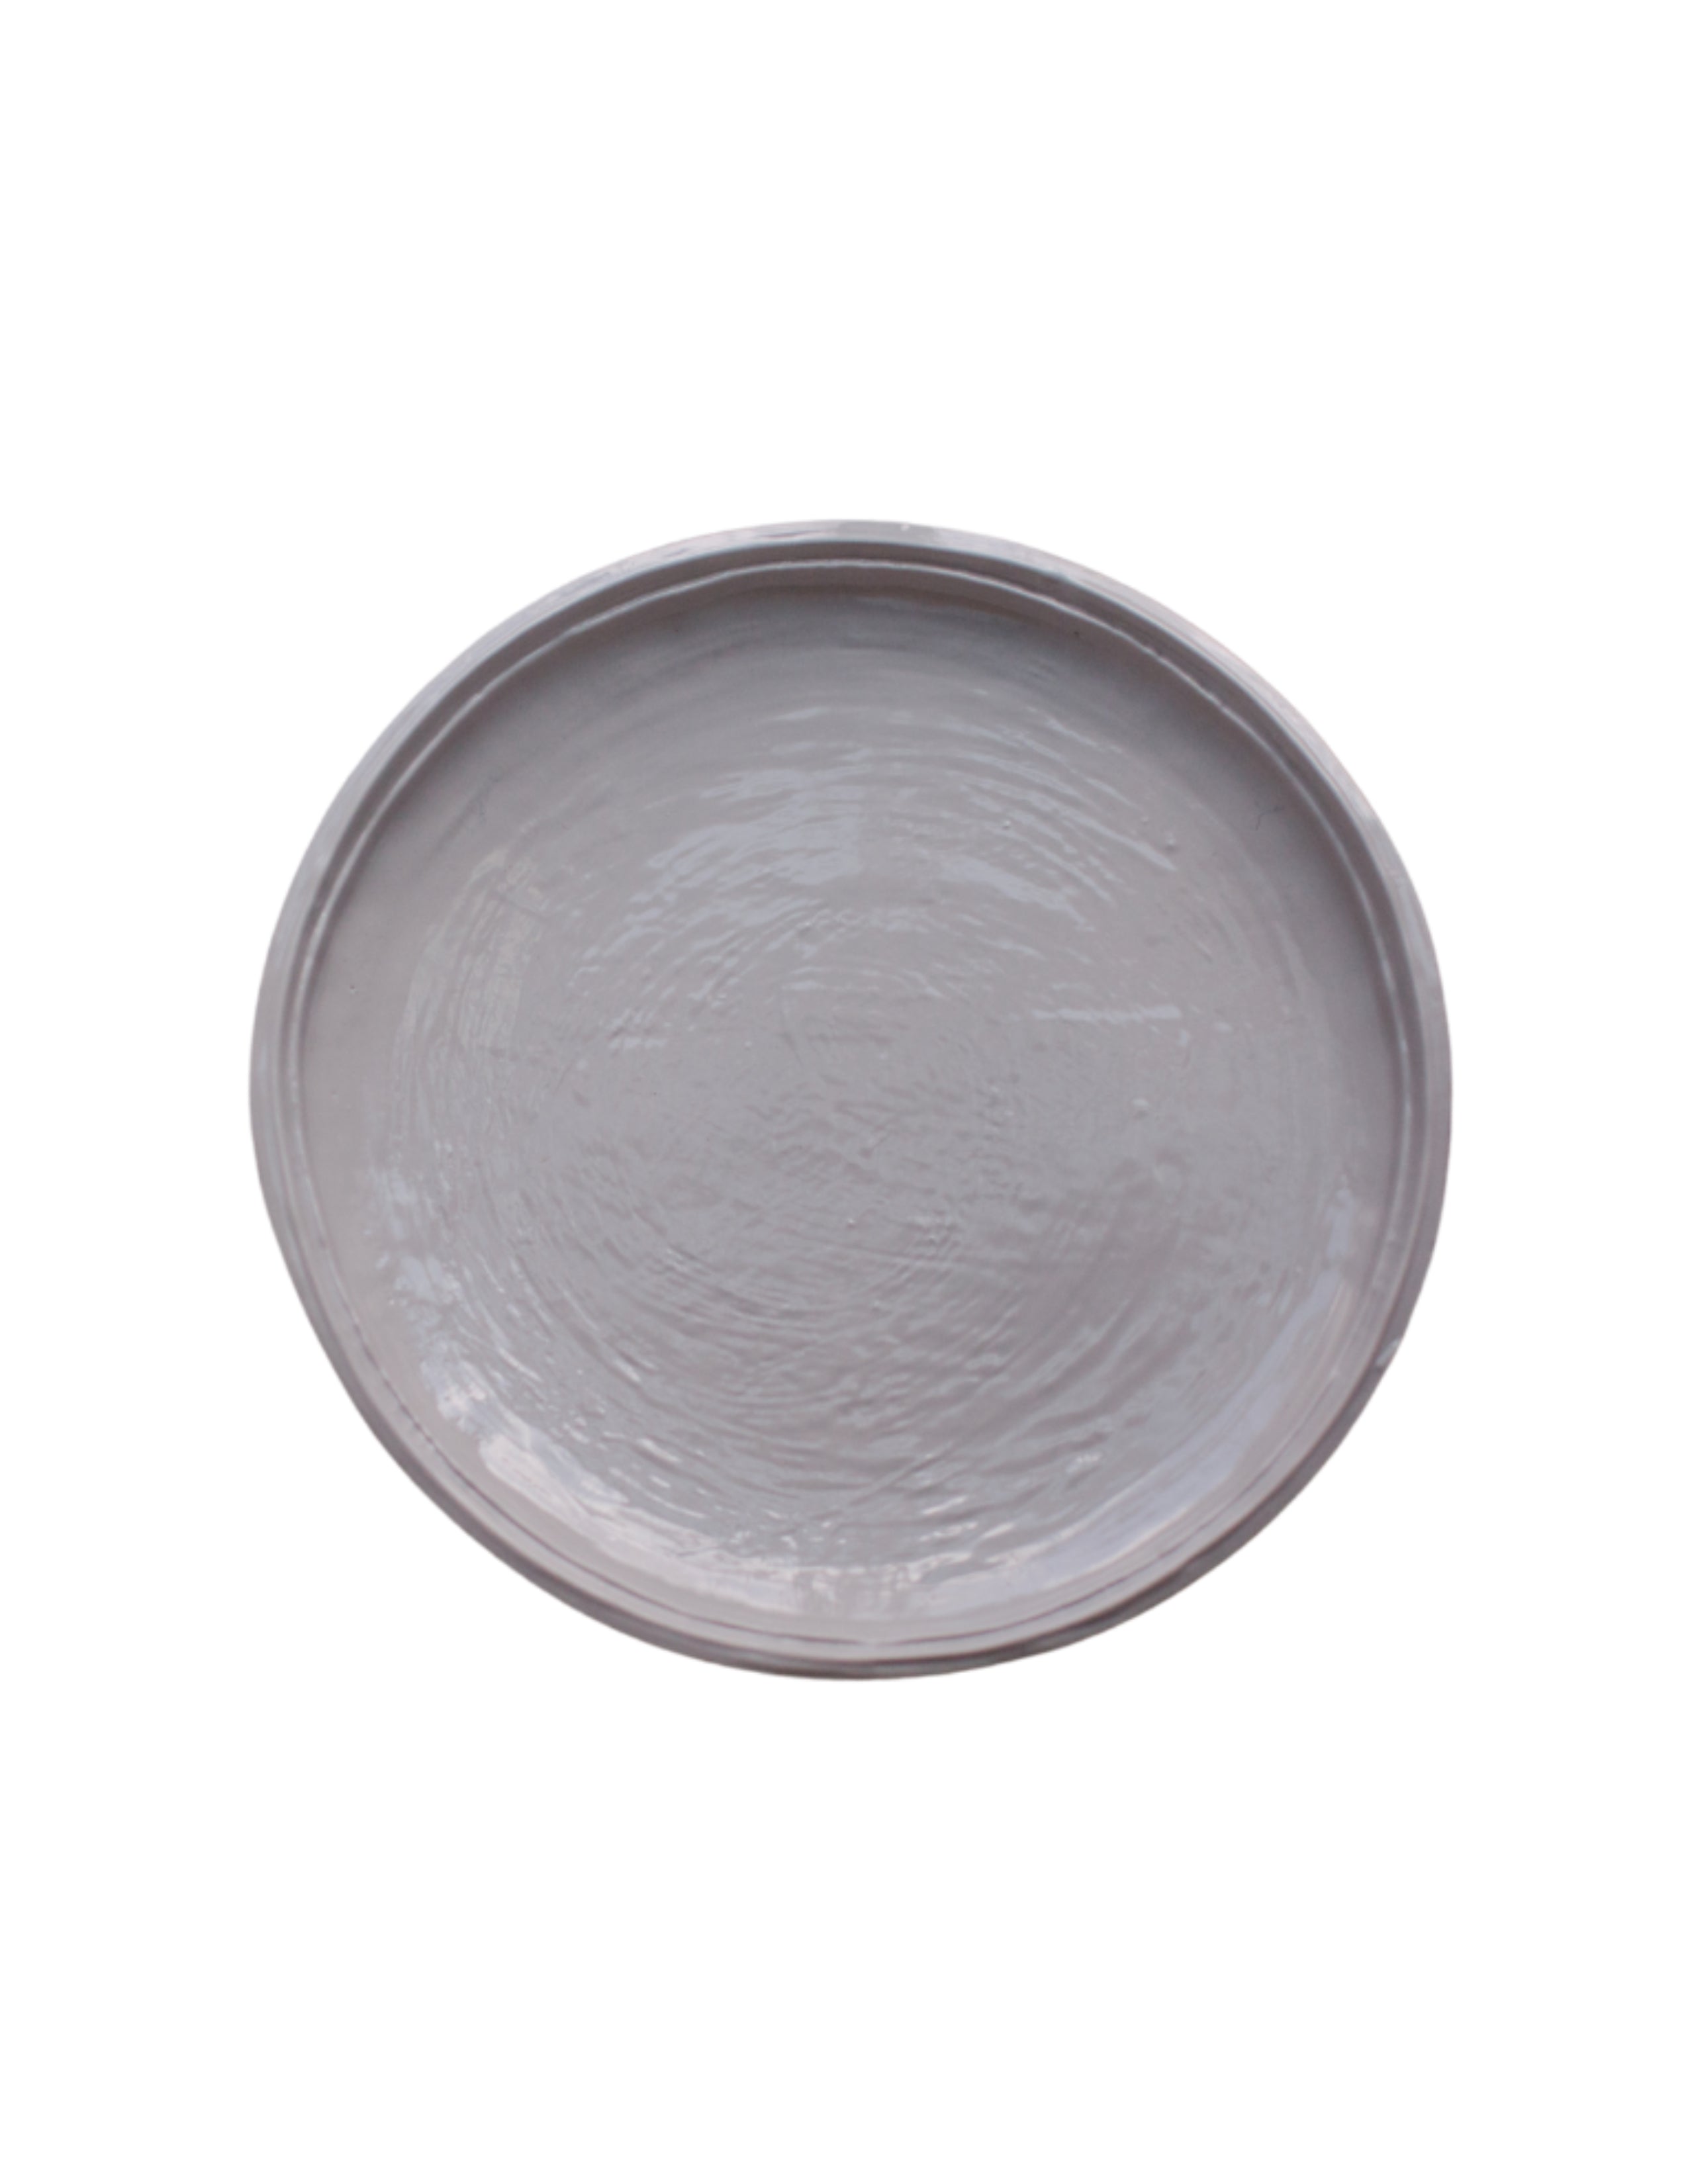 Double Lined Salad Plate - Stone